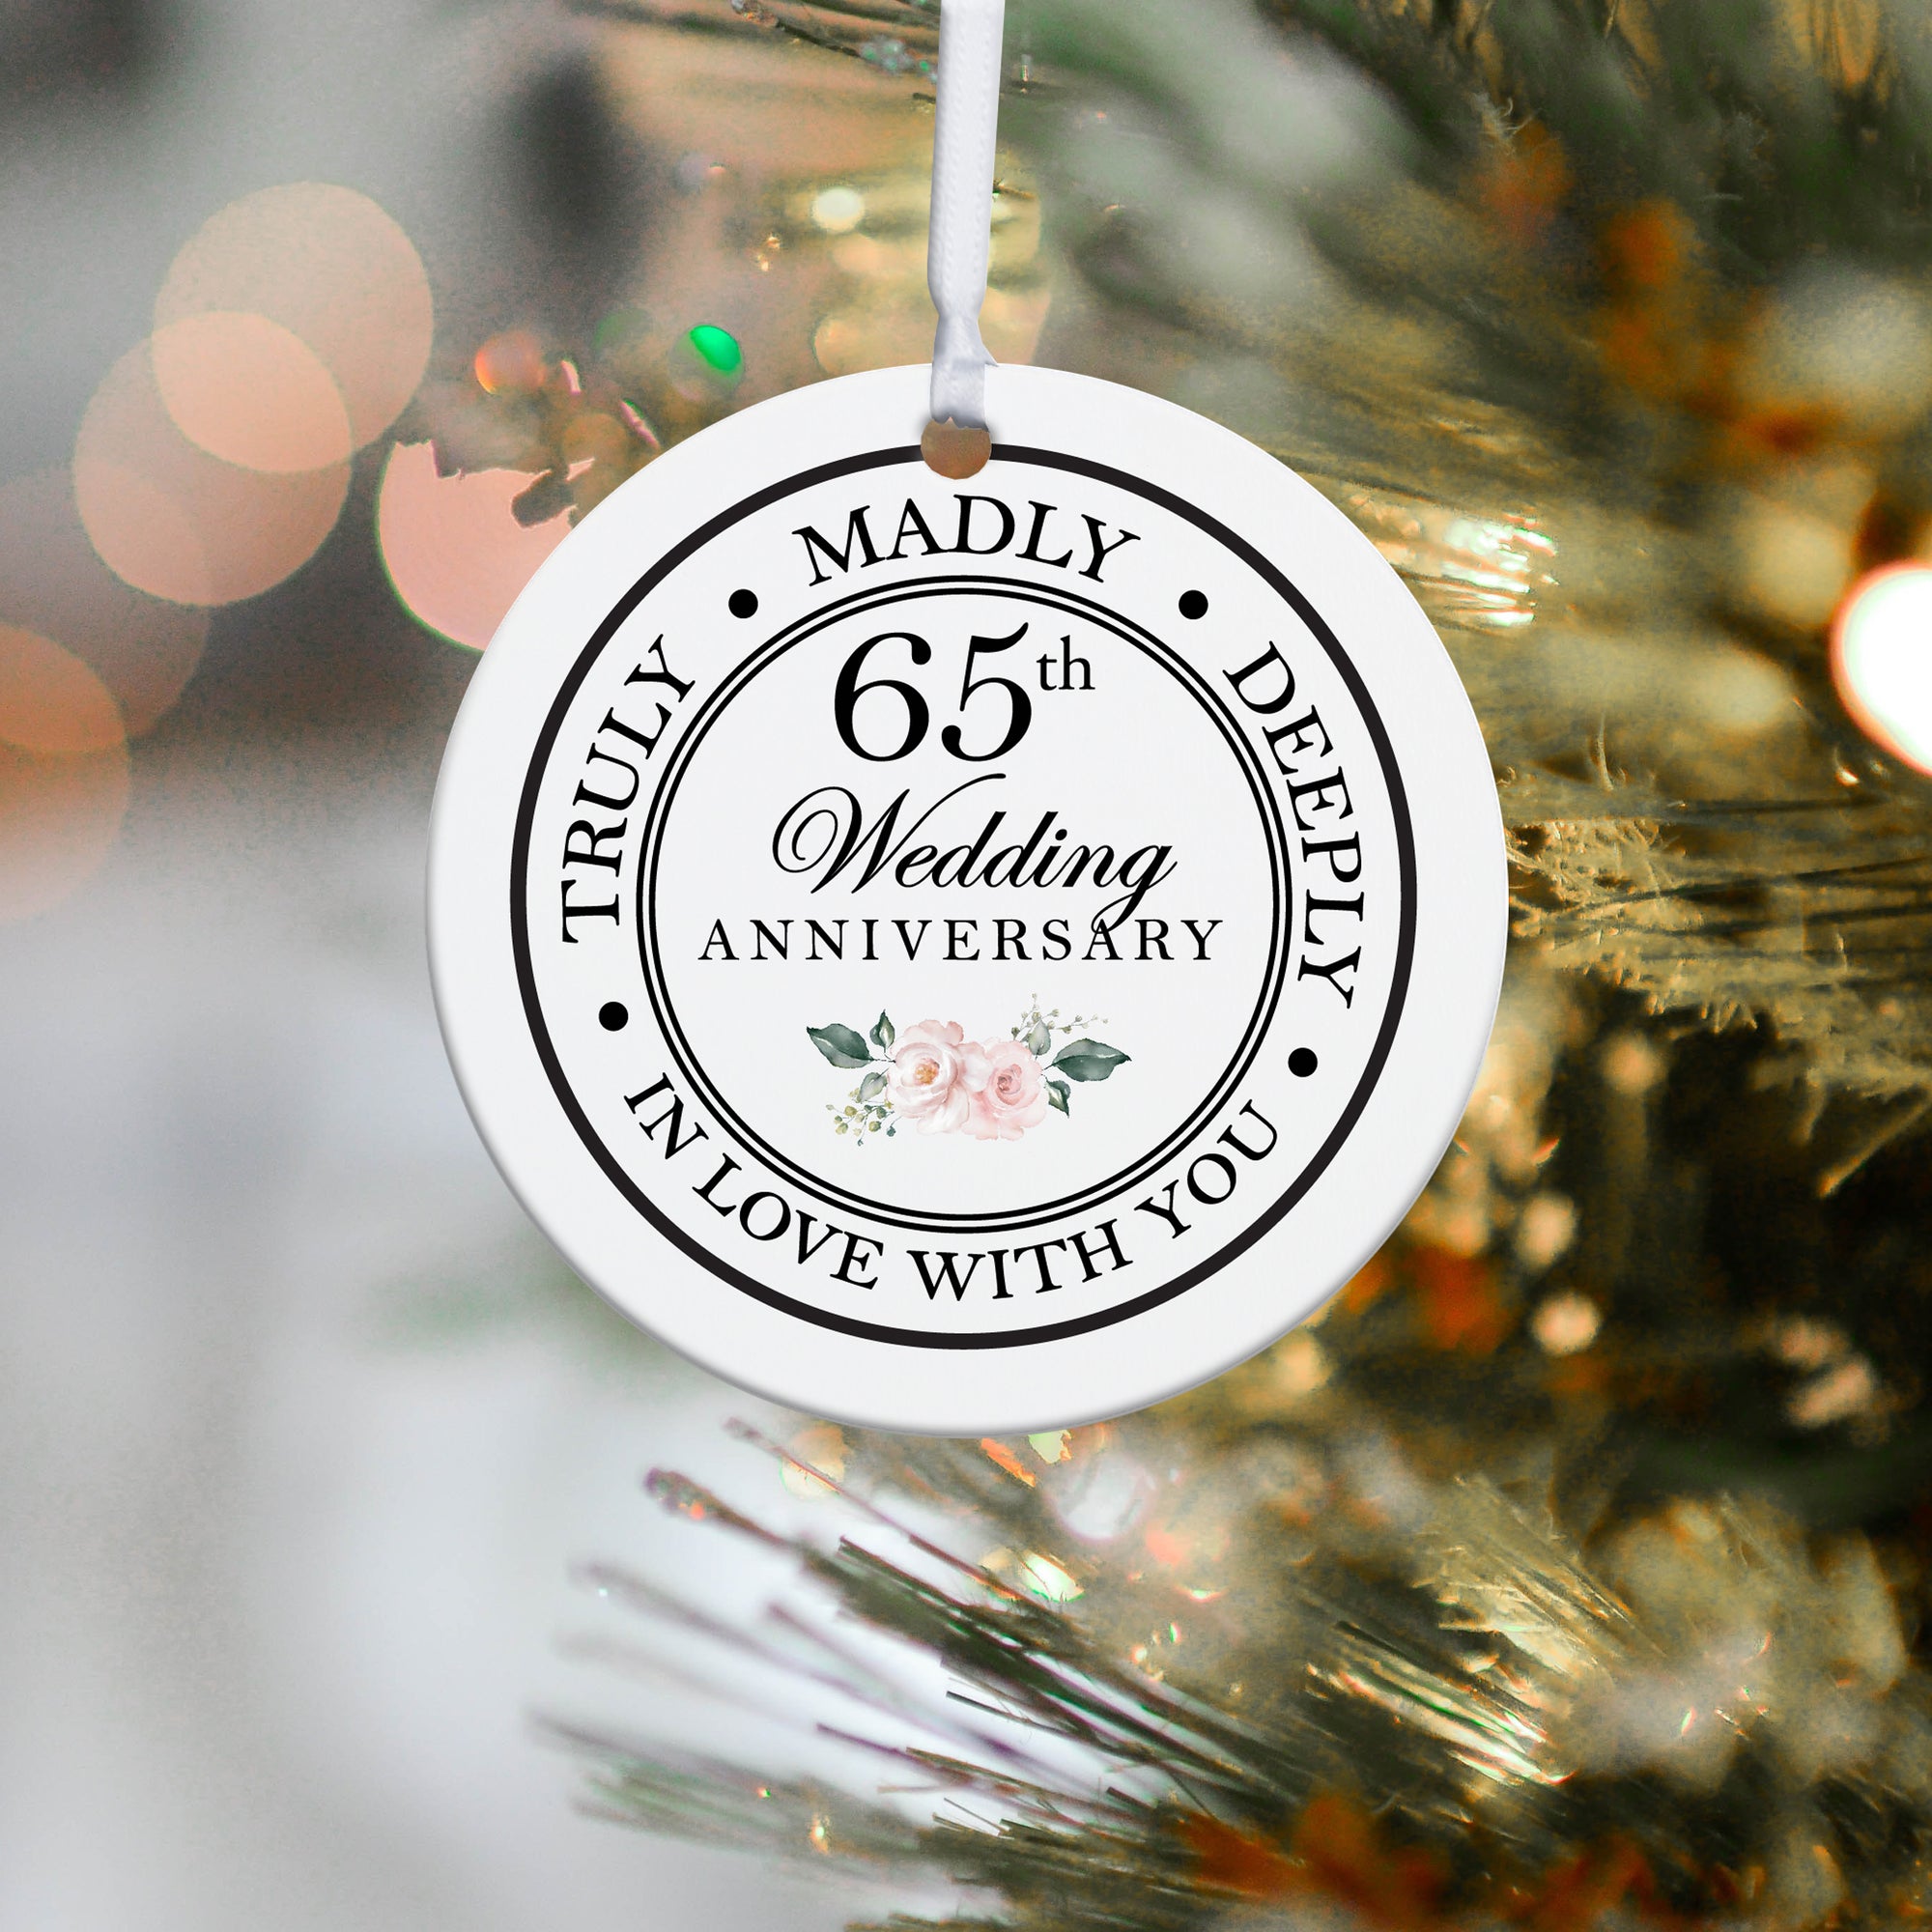 Commemorate your Love and Commitment with this Ornament Keepsake